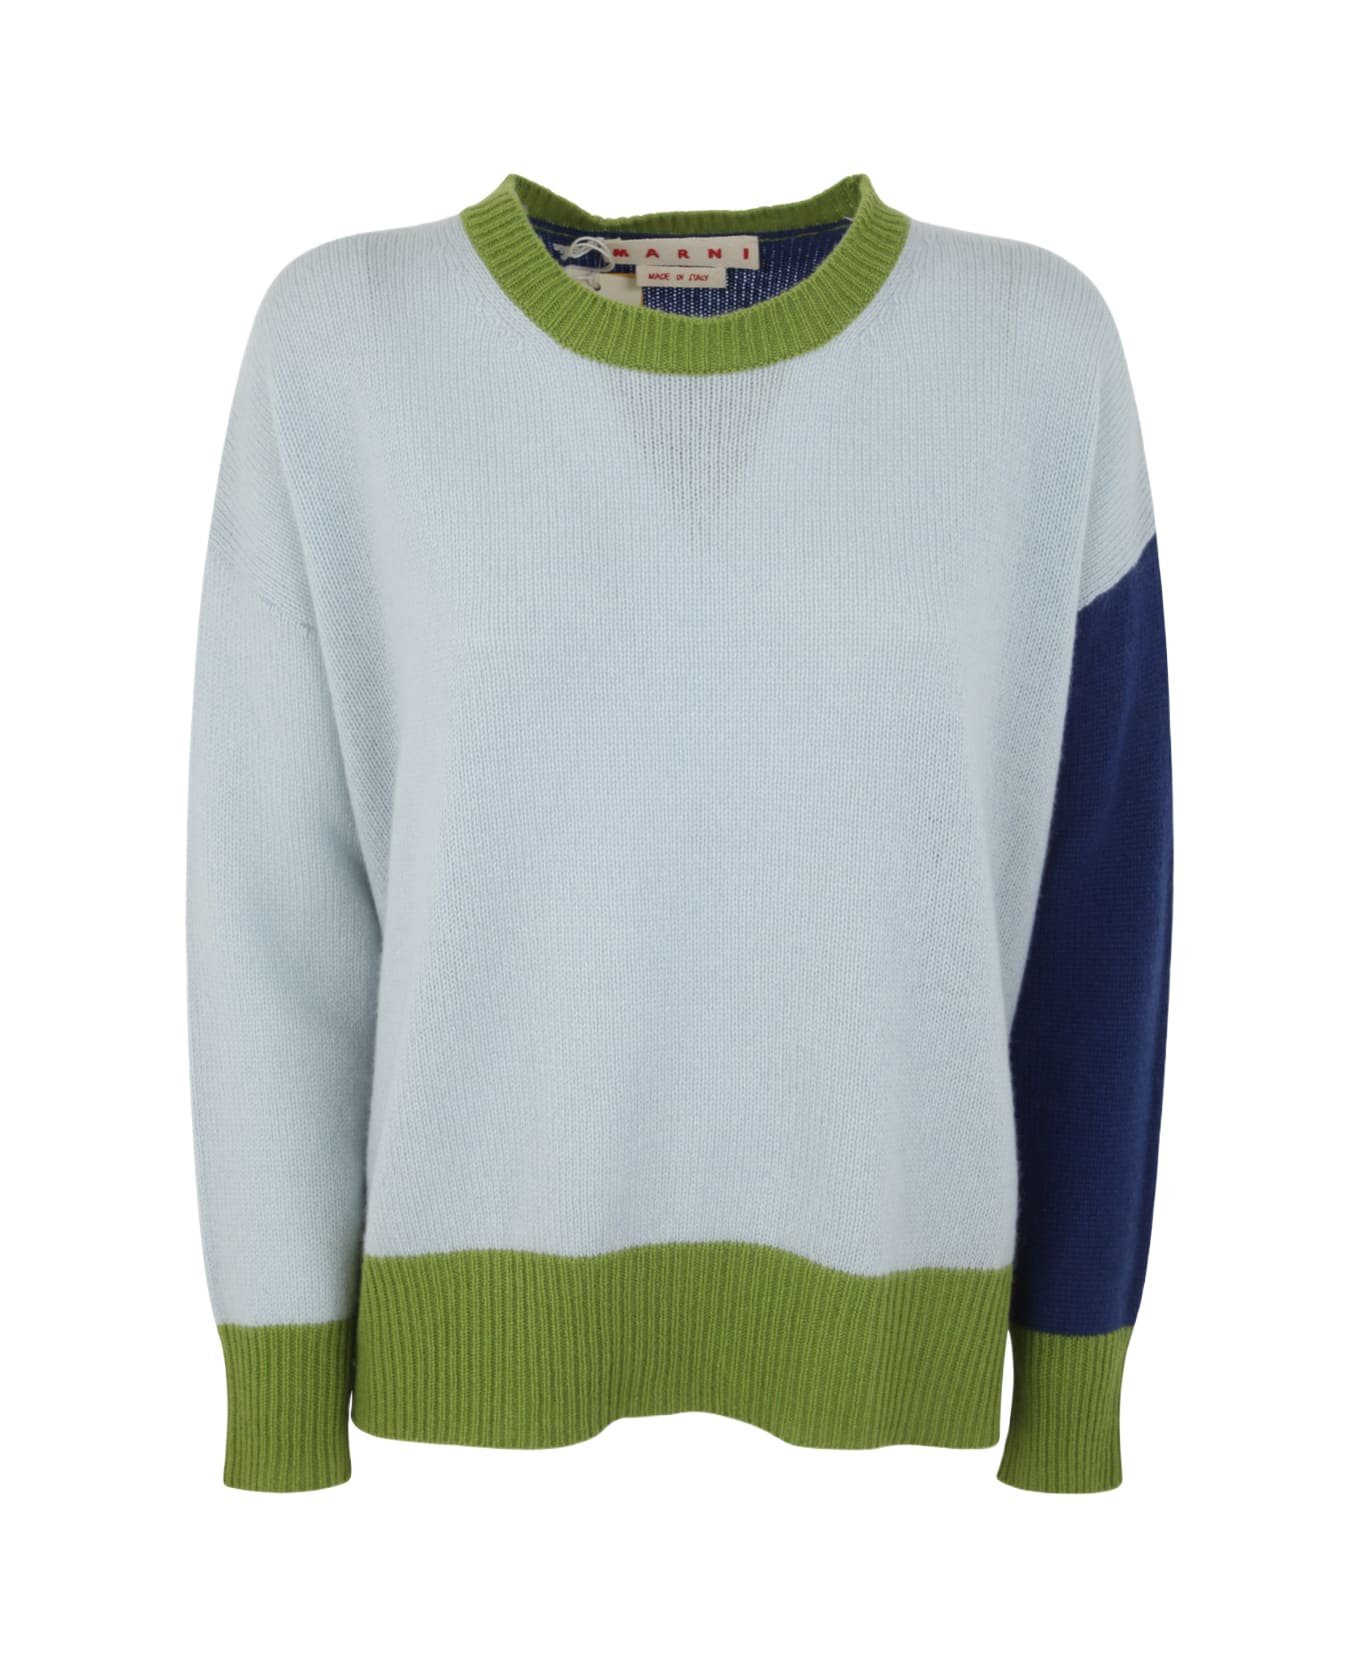 Marni Crew Neck Long Sleeves Loose Fit Sweater - Illusion Blue